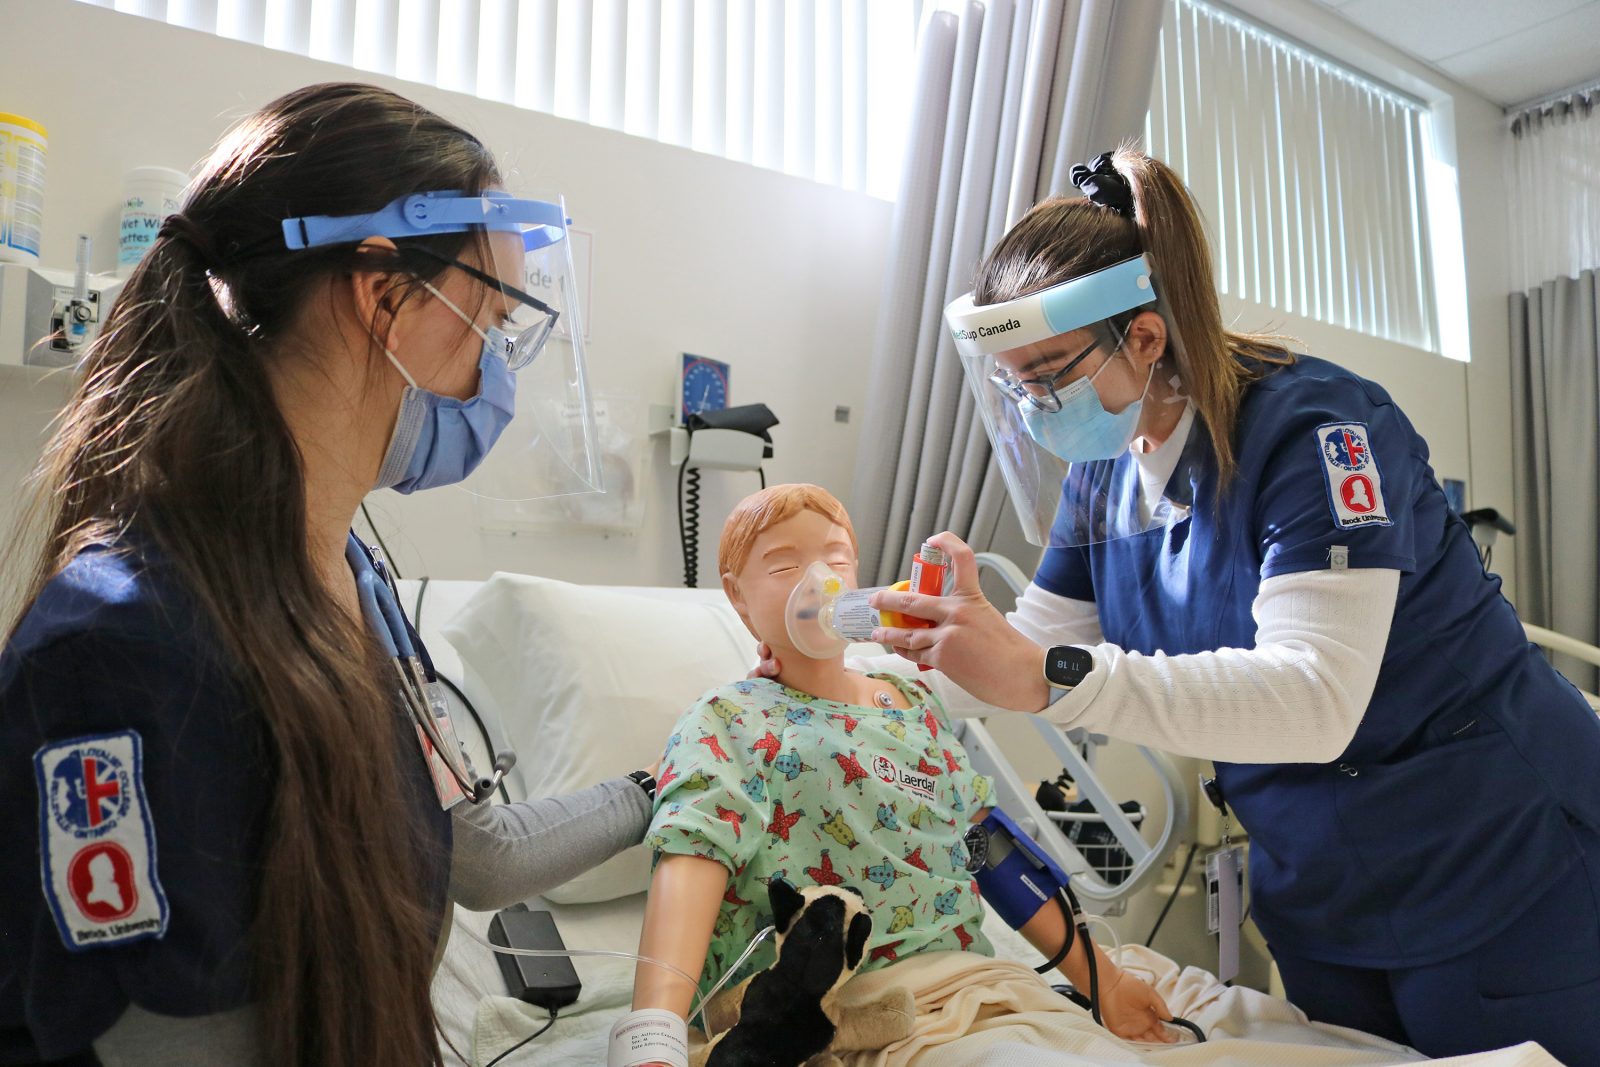 Two nursing students wearing medical masks and face shields use a breathing device on a simulator that looks like a human patient in one of Brock's Nursing labs.